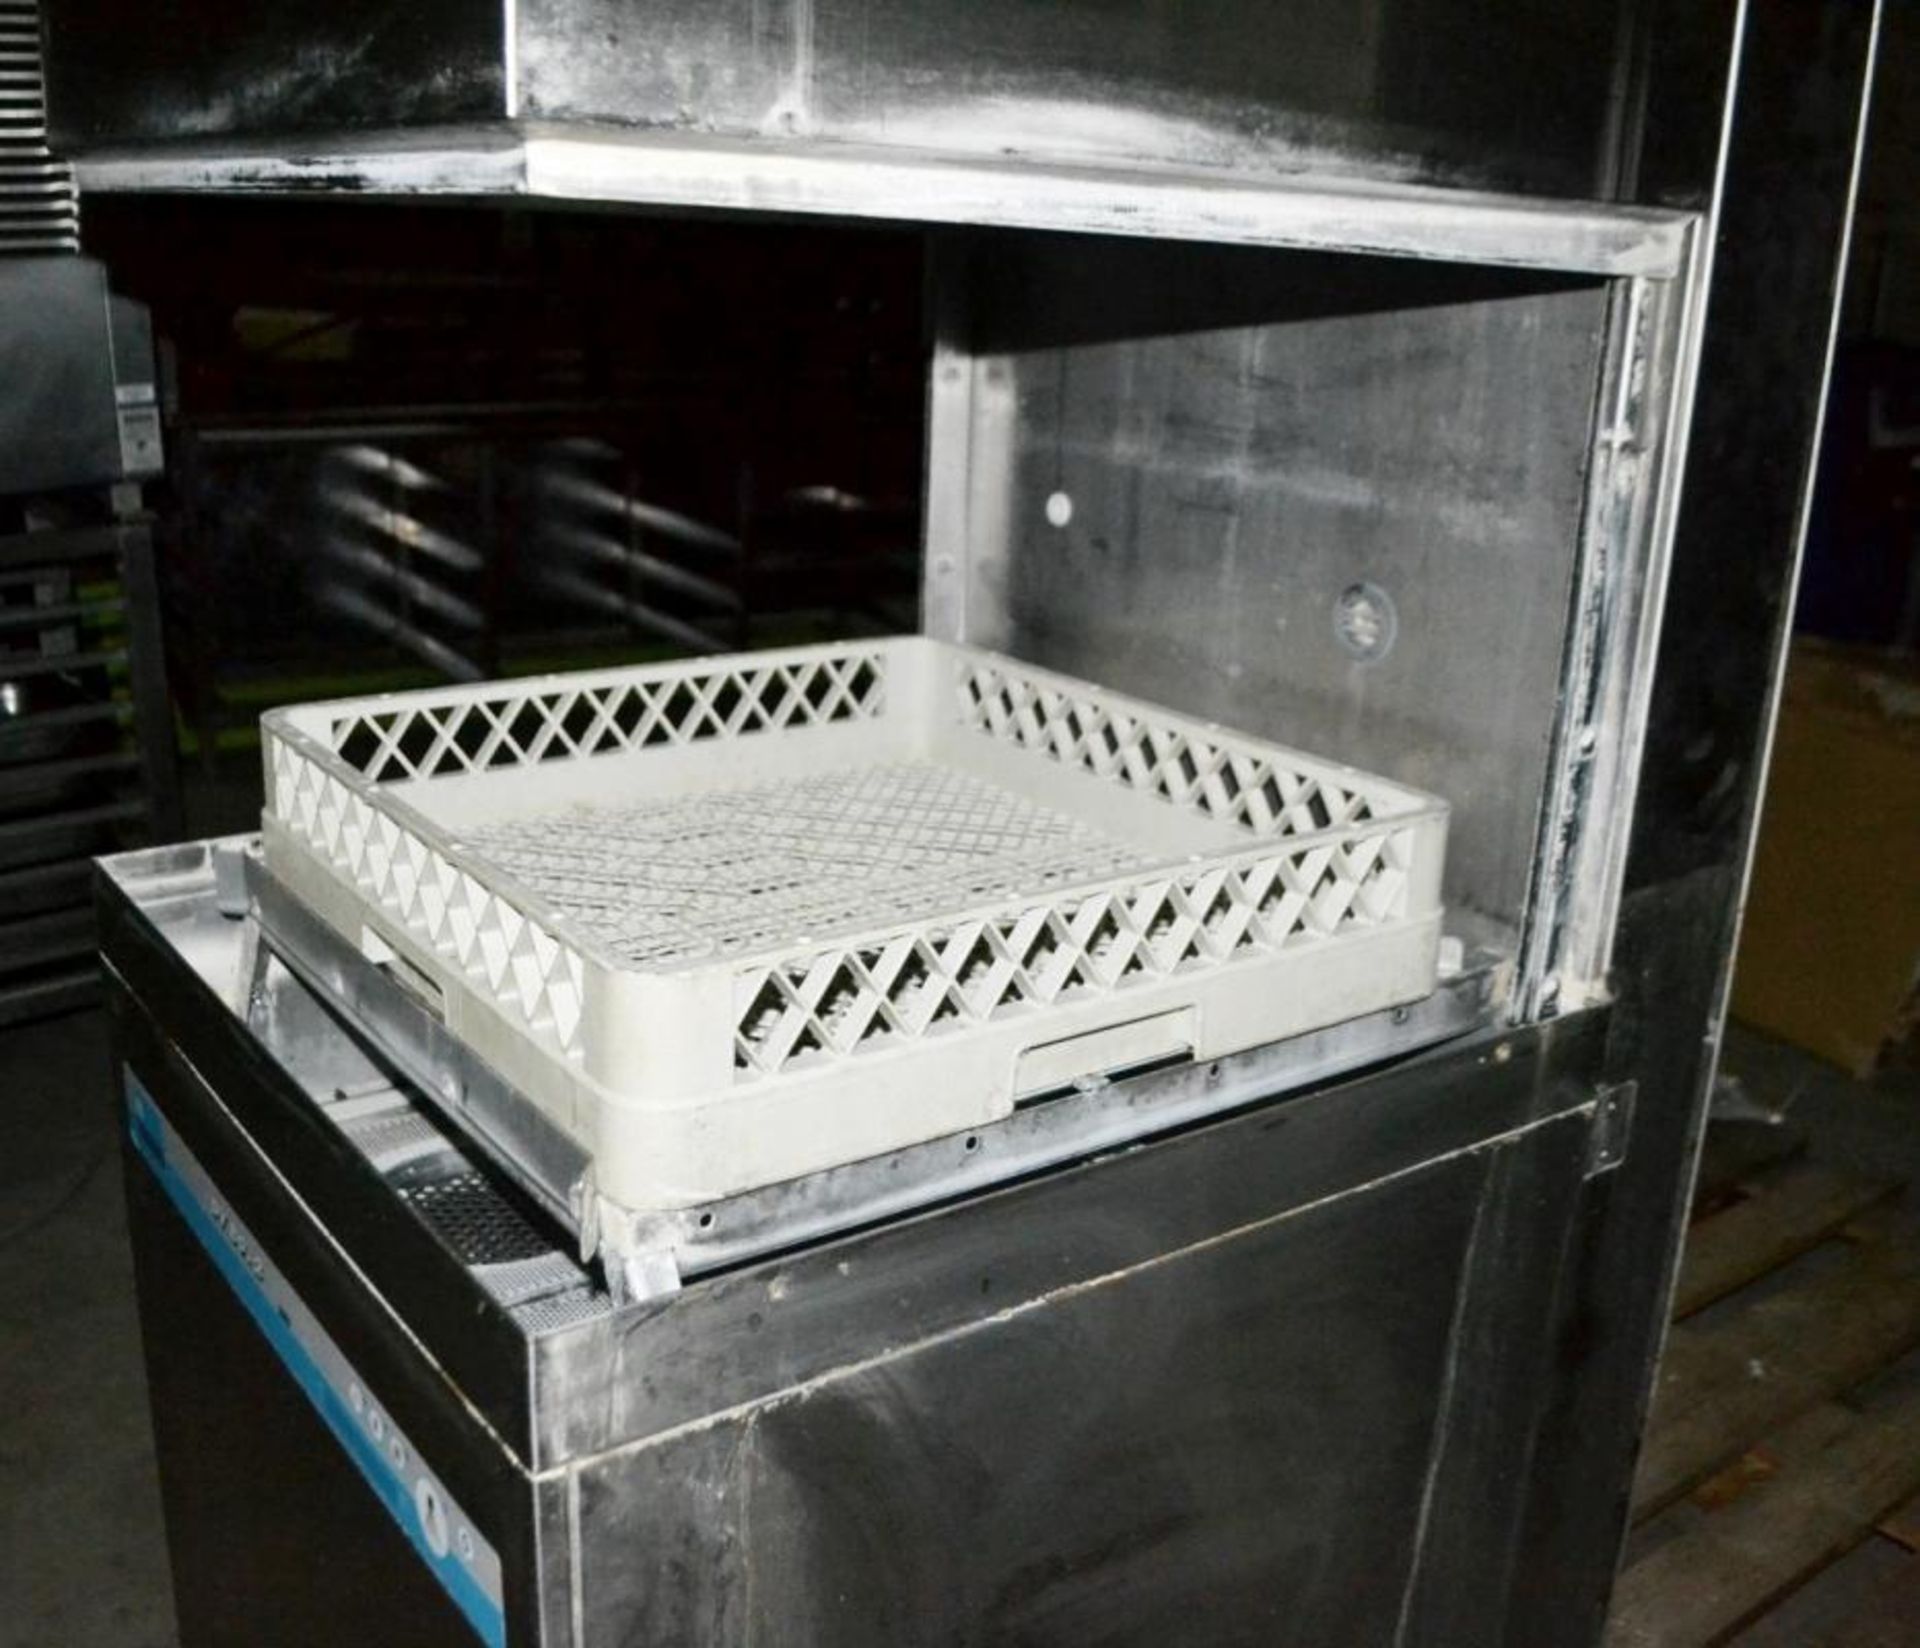 1 x MEIKO DV80.2 Pass Through Dishwasher With 2 x Modules And Inlet Sink - CL011 - Ref: 220 - Locati - Image 3 of 10